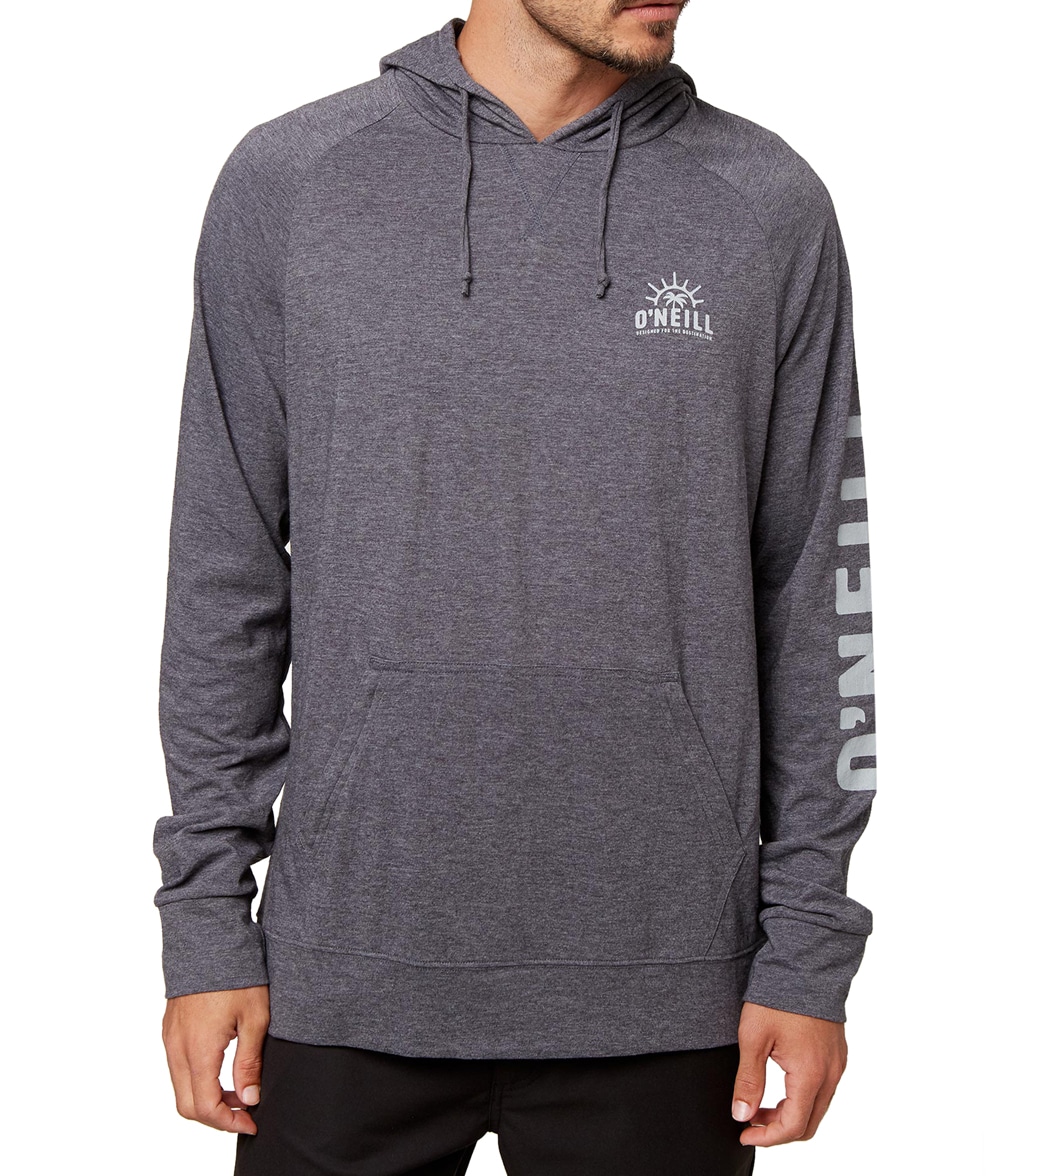 O'neill Men's Holm Traveler Long Sleeve Hooded Tee Shirt - Heather Black 3 Large Cotton/Polyester - Swimoutlet.com